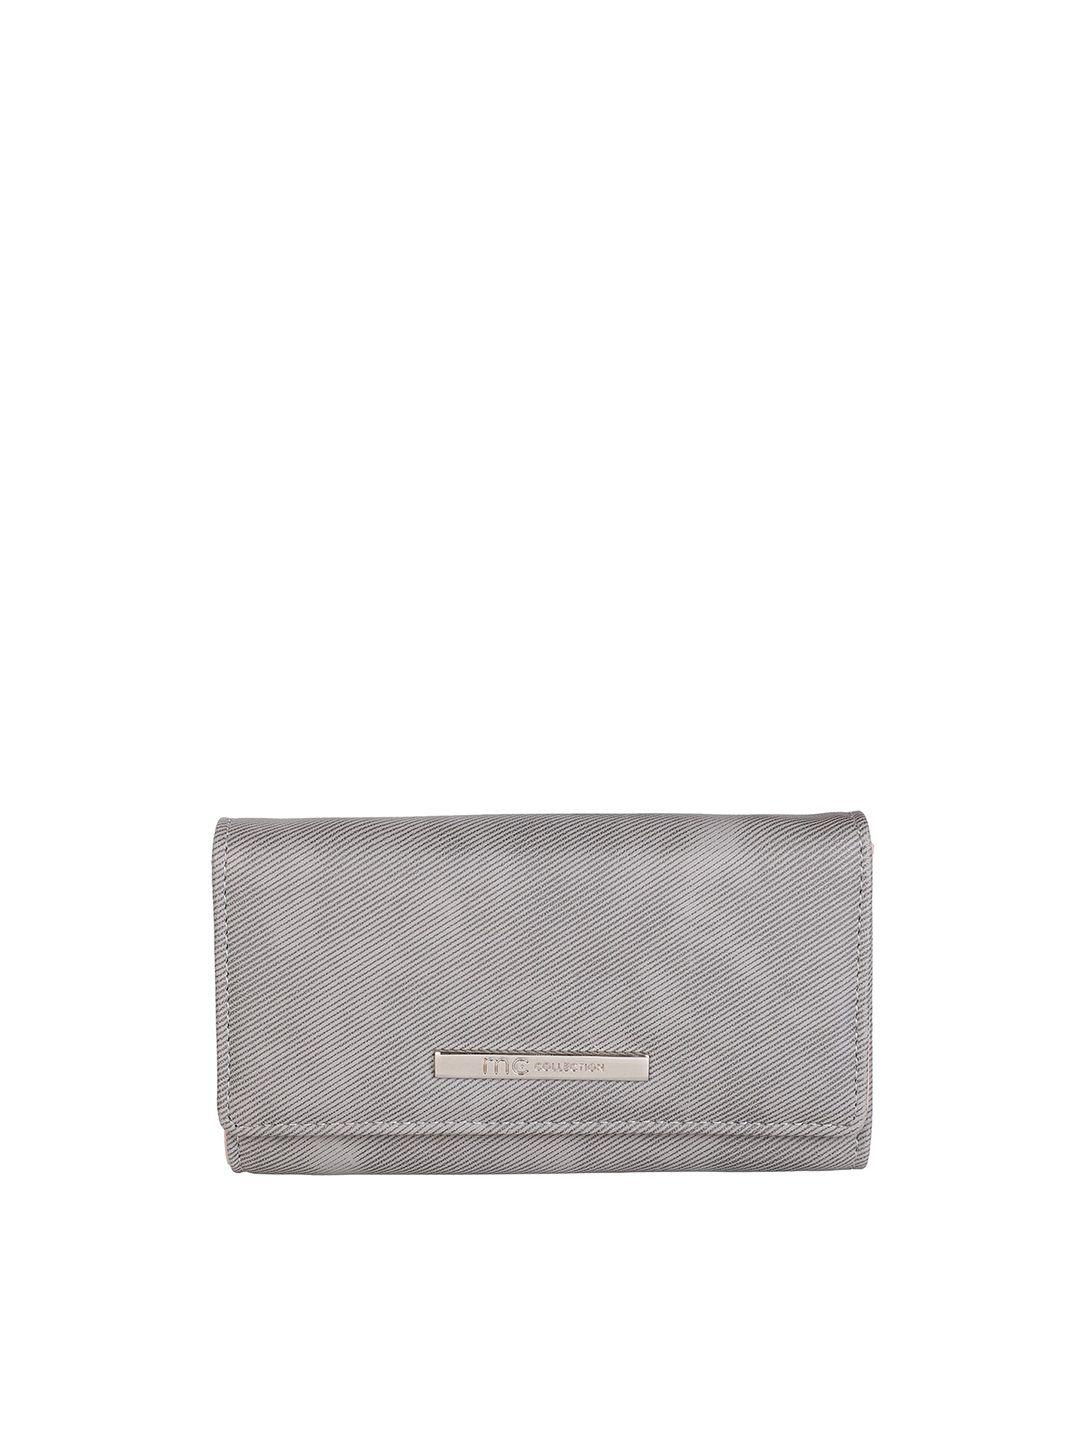 marie claire grey & peach-coloured synthetic envelope clutch